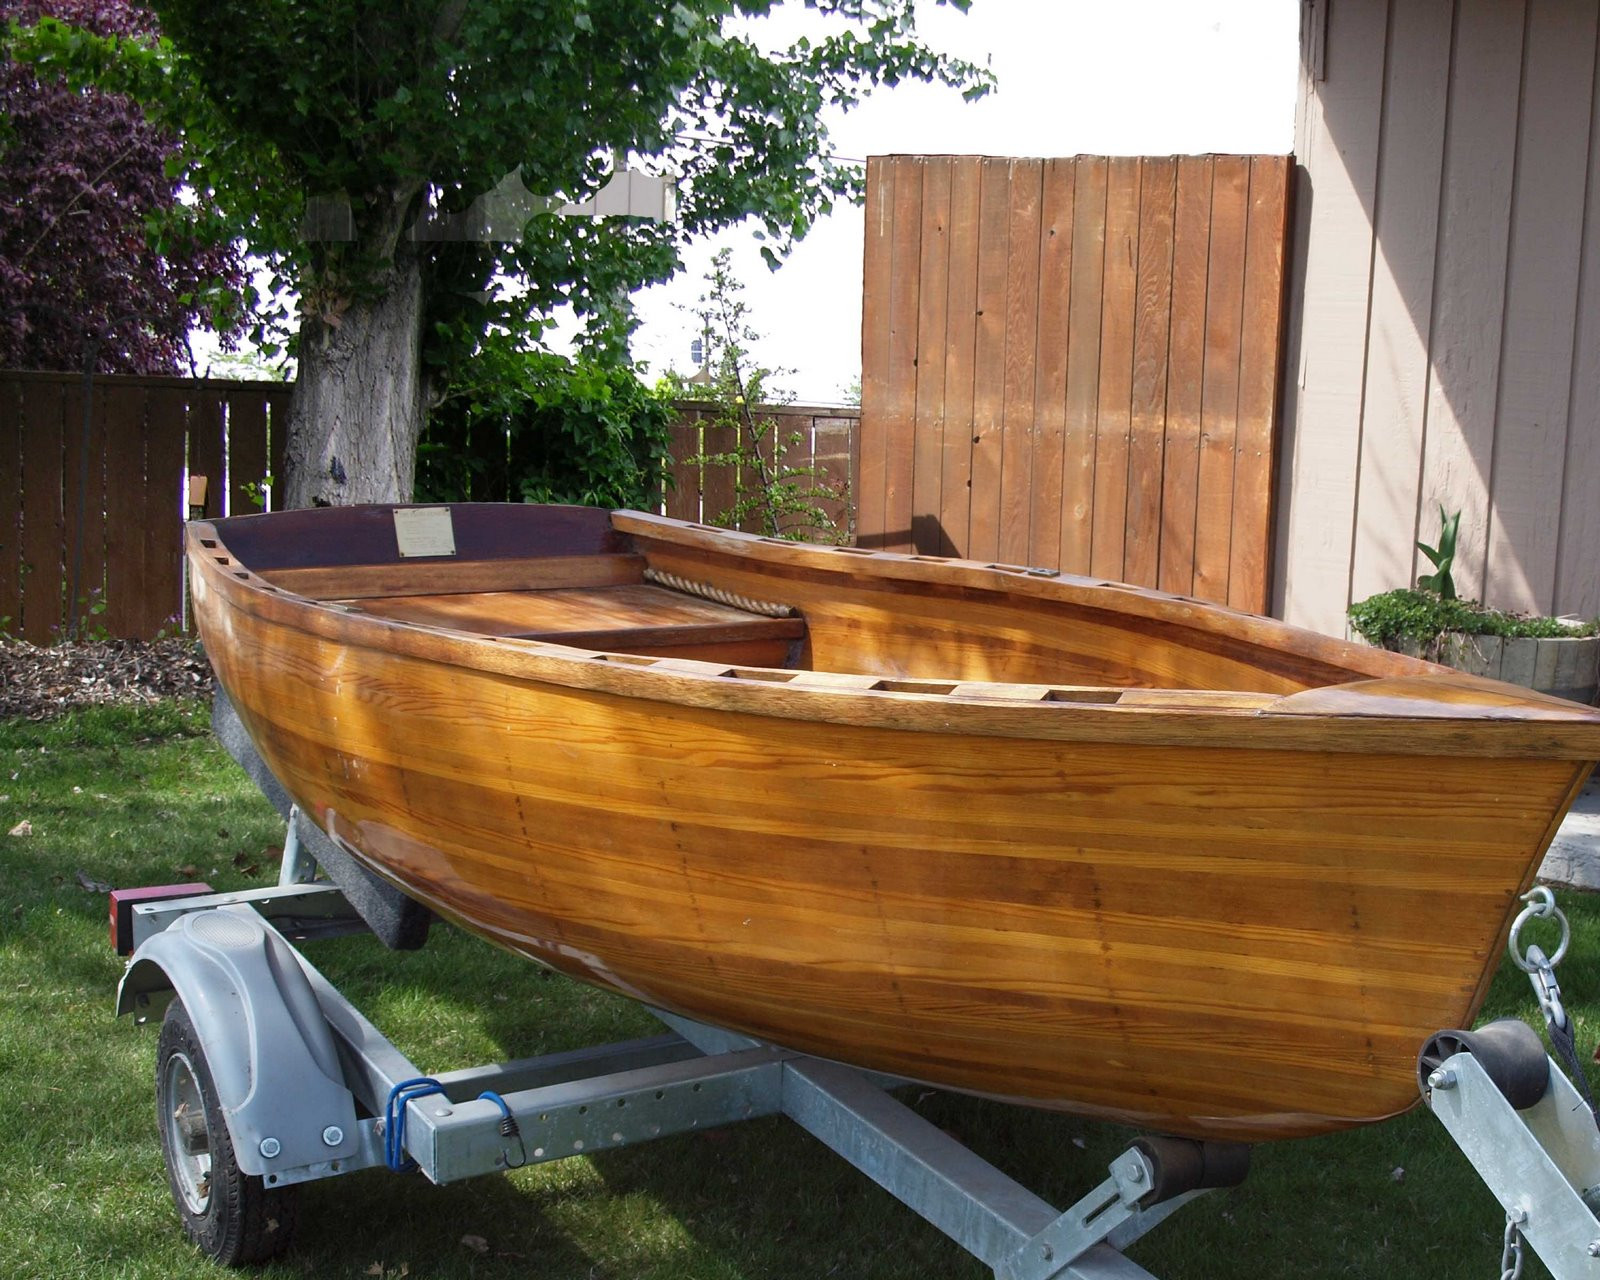 DIY Wooden Boat
 Jay Wooden Rowing Boat Diy Kits For Sale How to Building